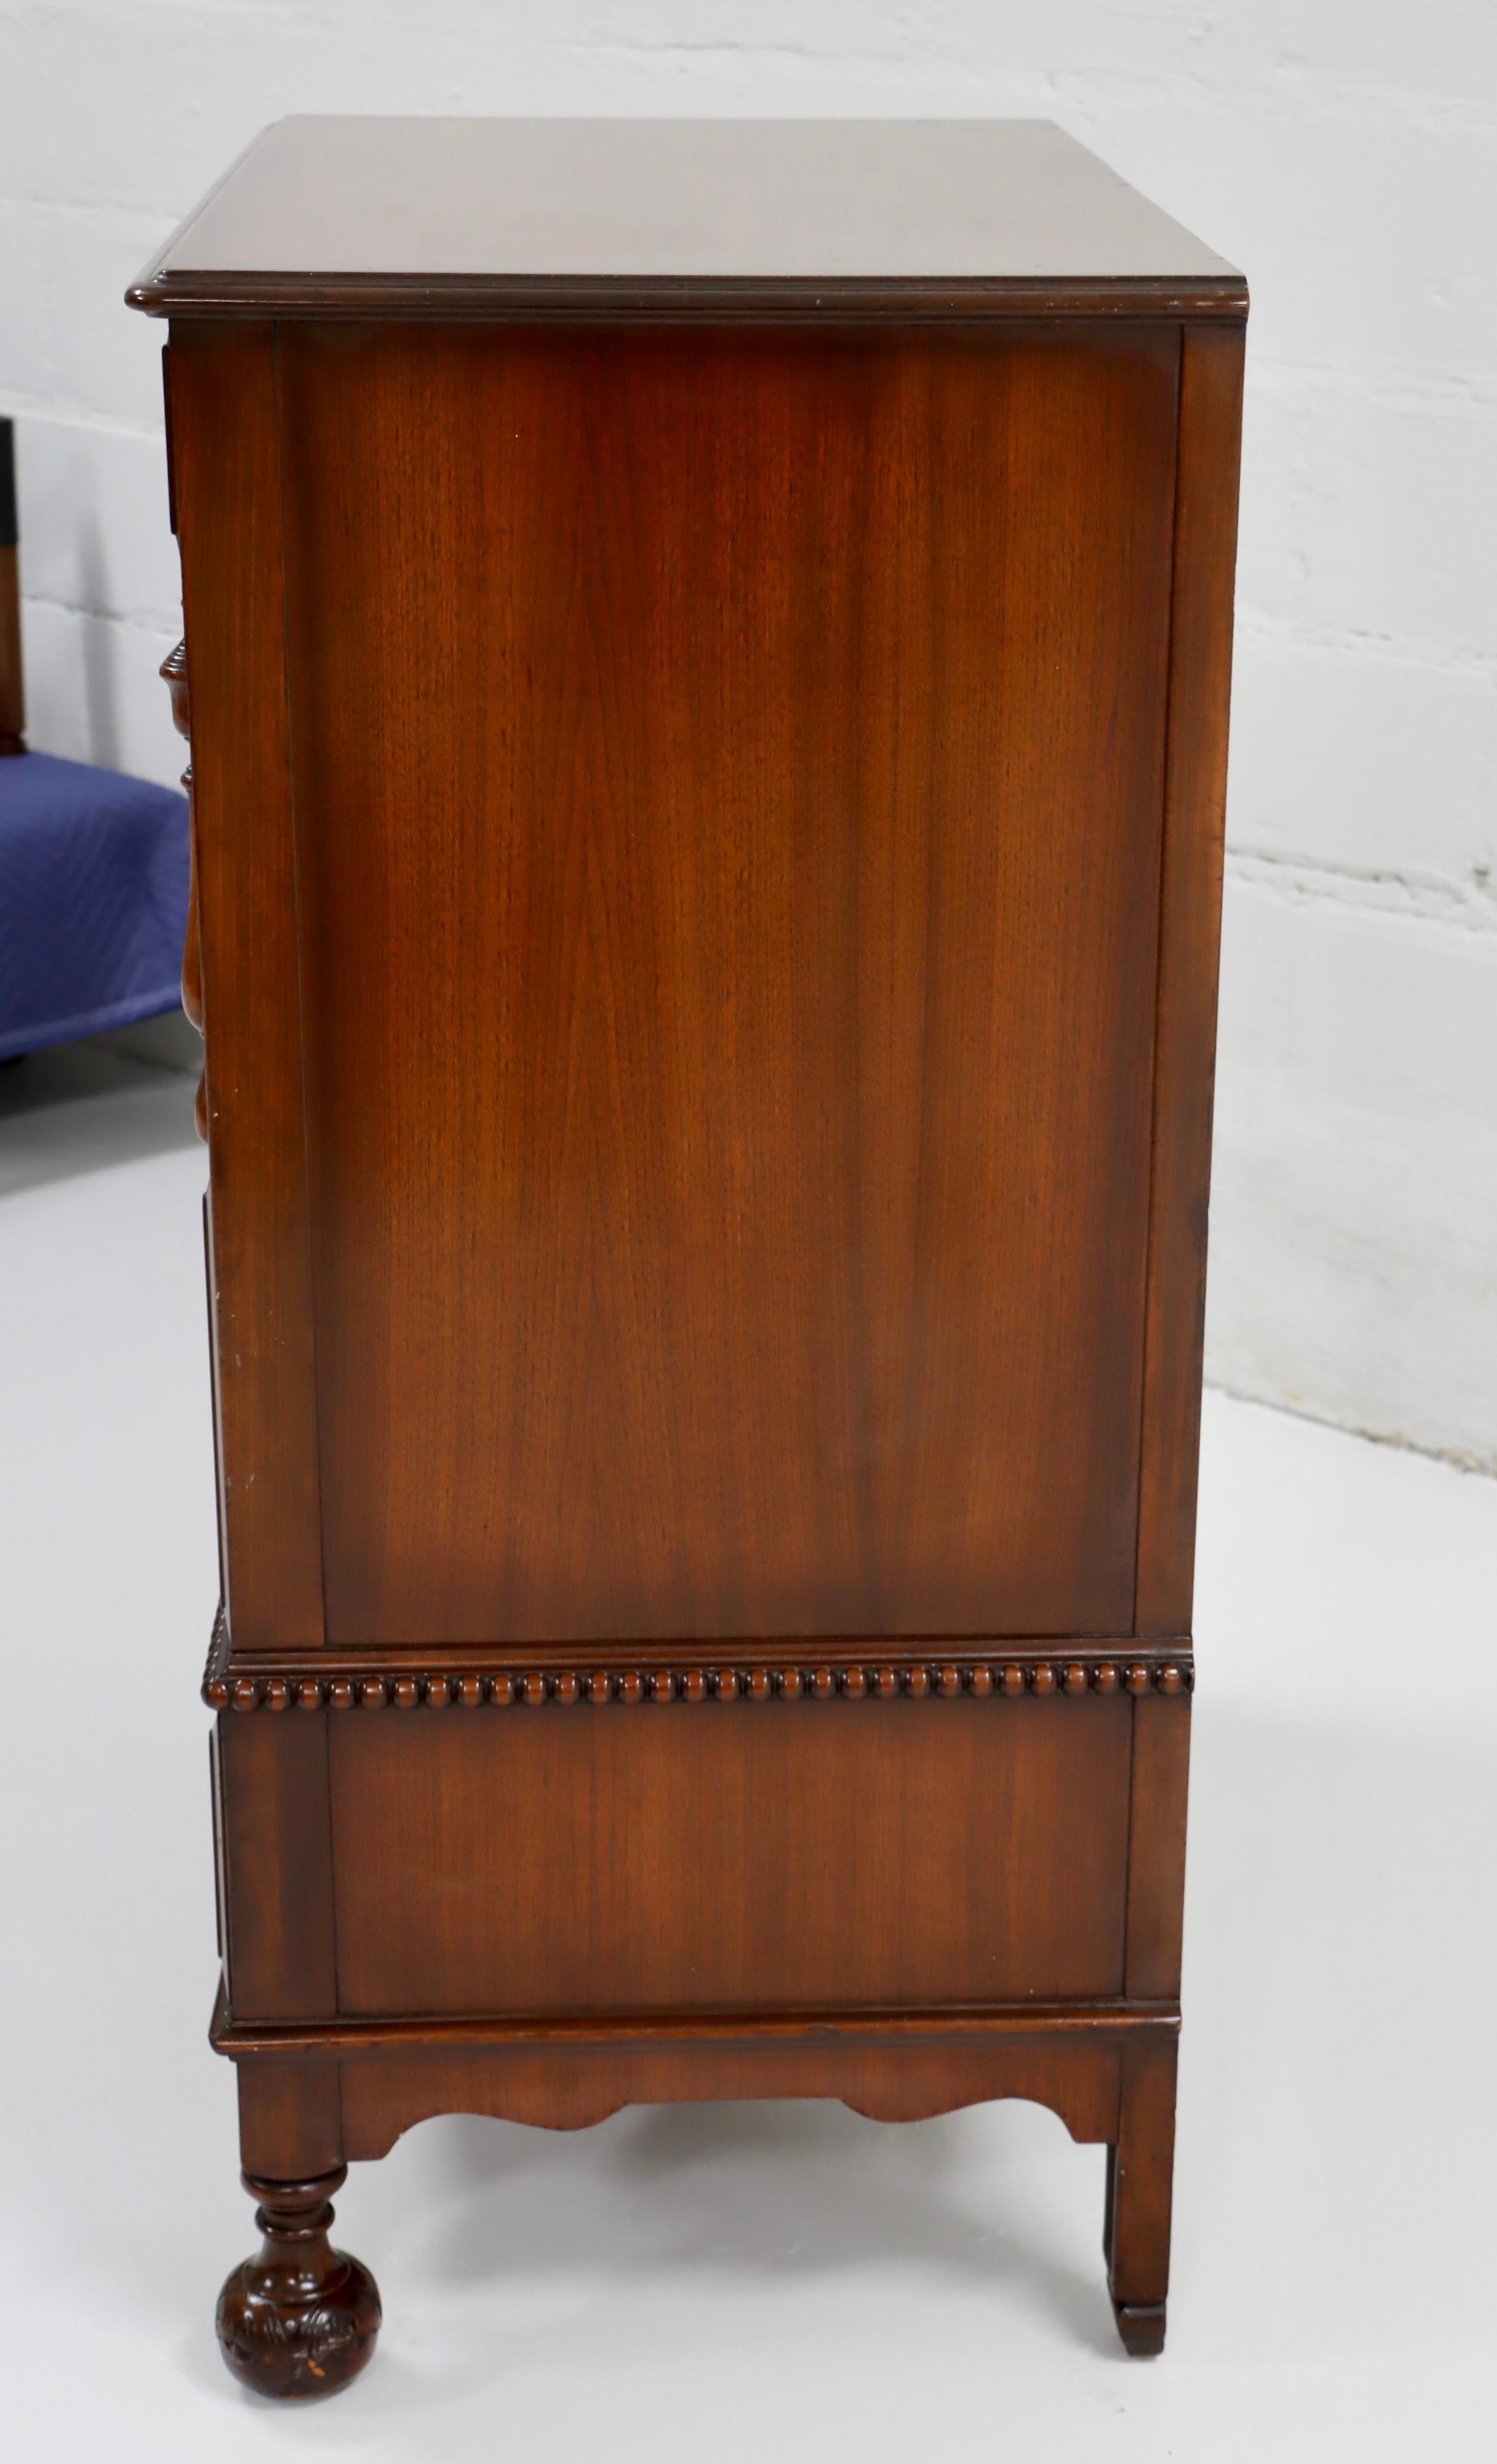 Brass 1940's Tall Dresser By Berkey & Gay Furniture With Amazing Carved Wood Detail